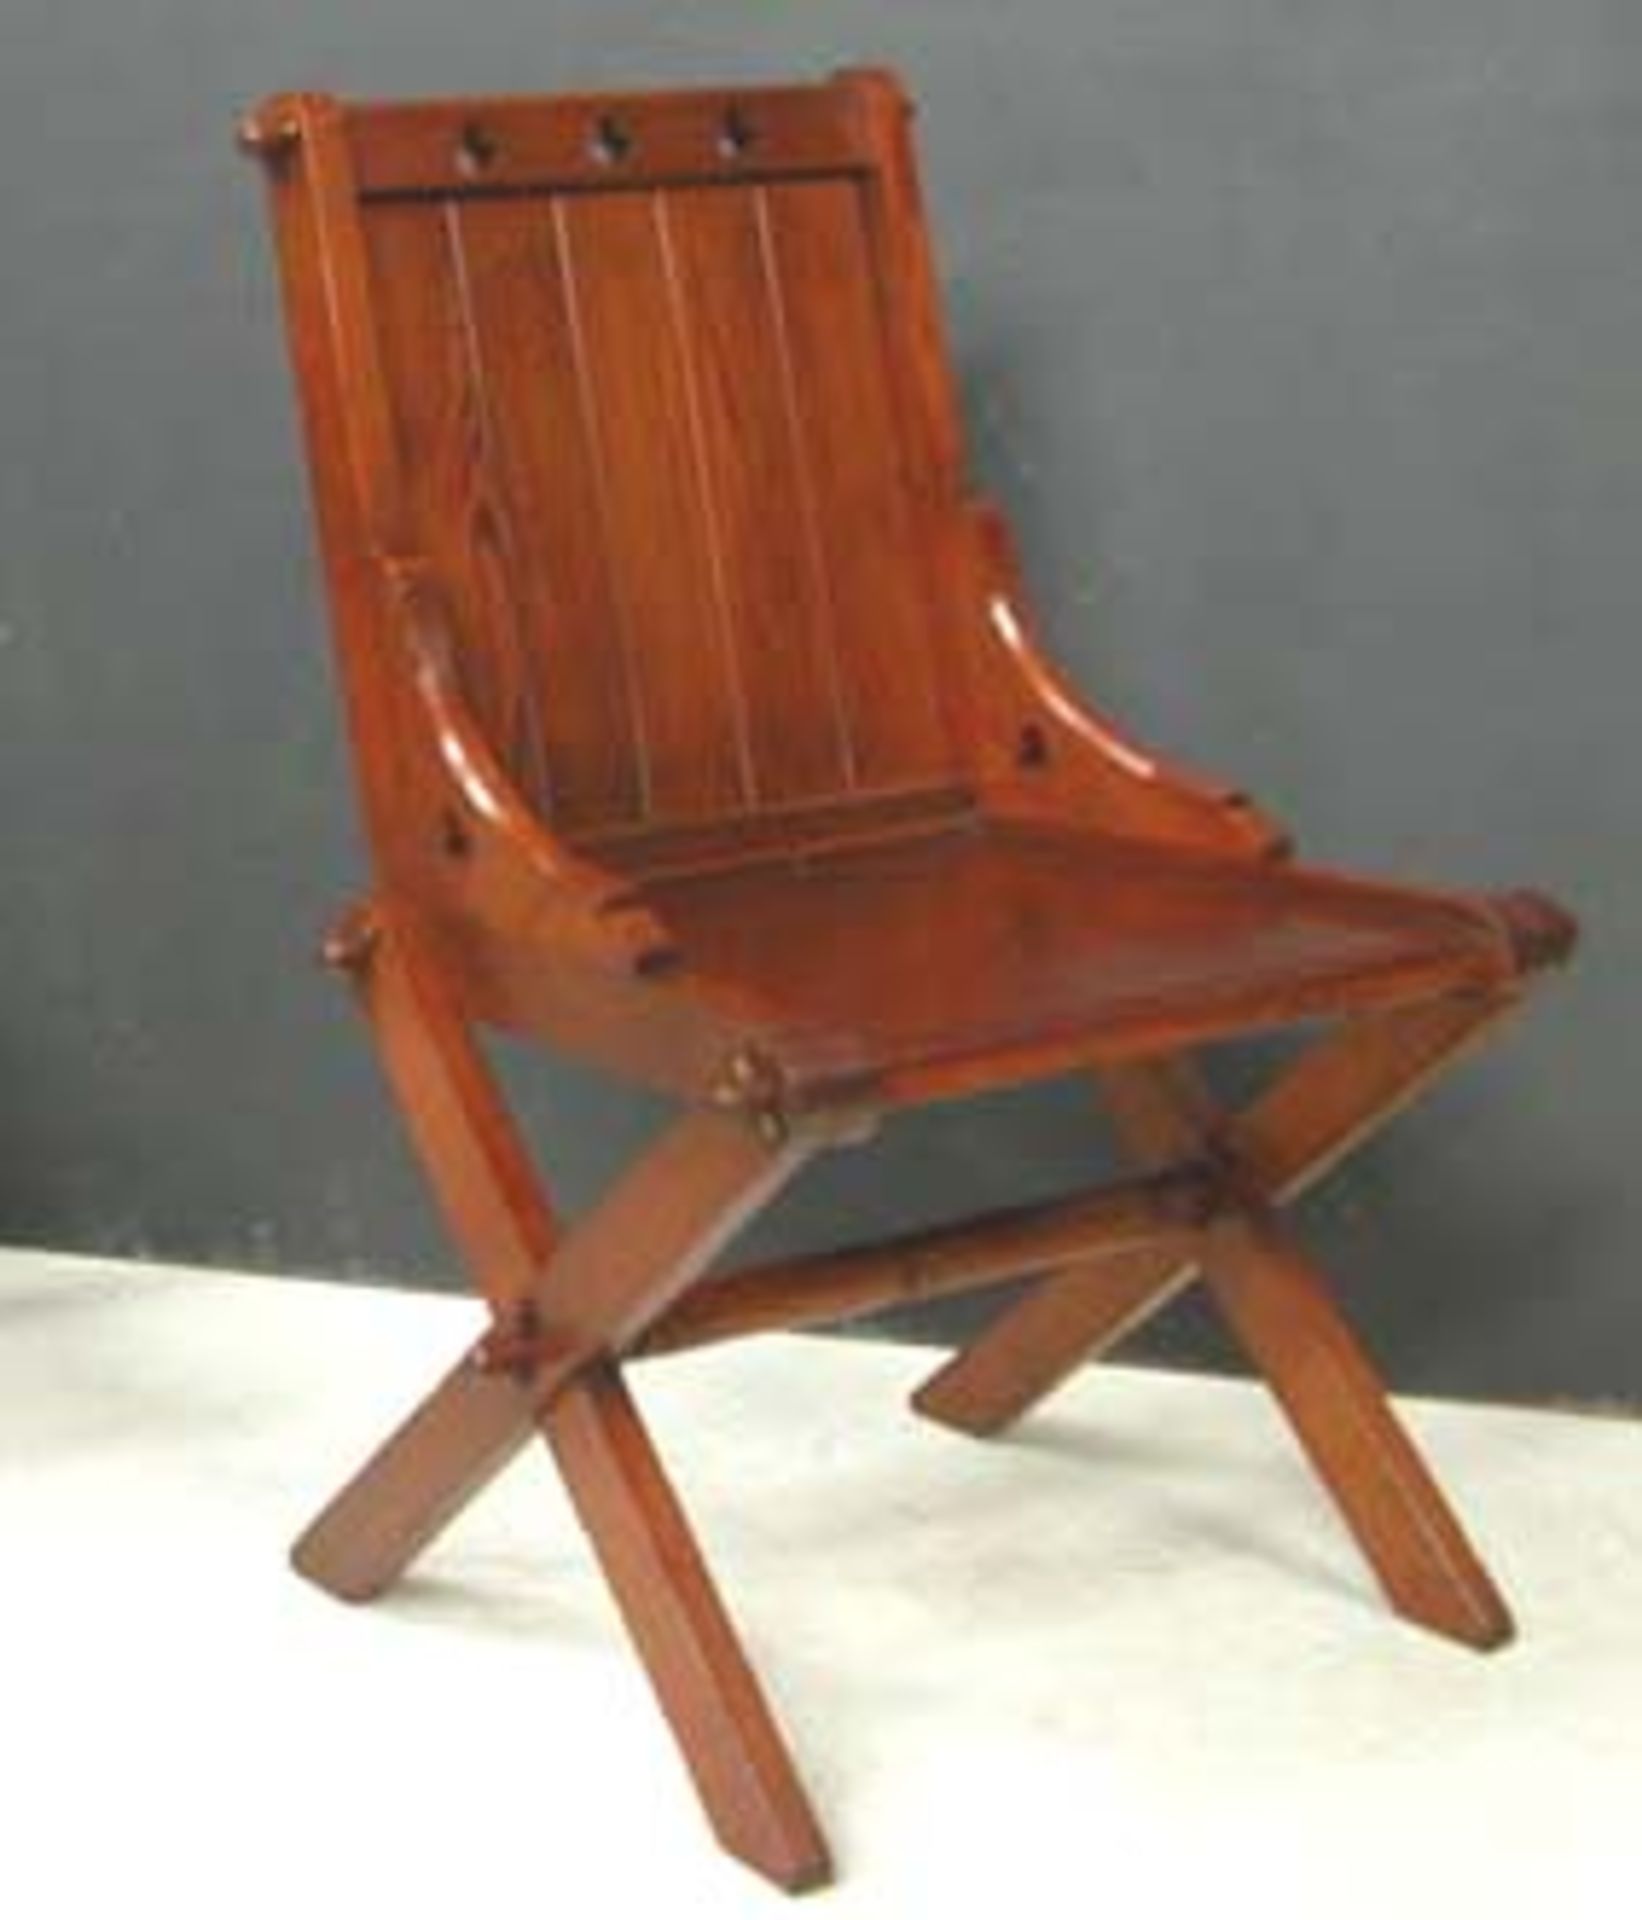 *PITCH PINE GLASTONBURY CHAIR, CIRCA 1880. 900MM (35.4IN) HIGH X 610MM (24IN) WIDE X 530MM (20.